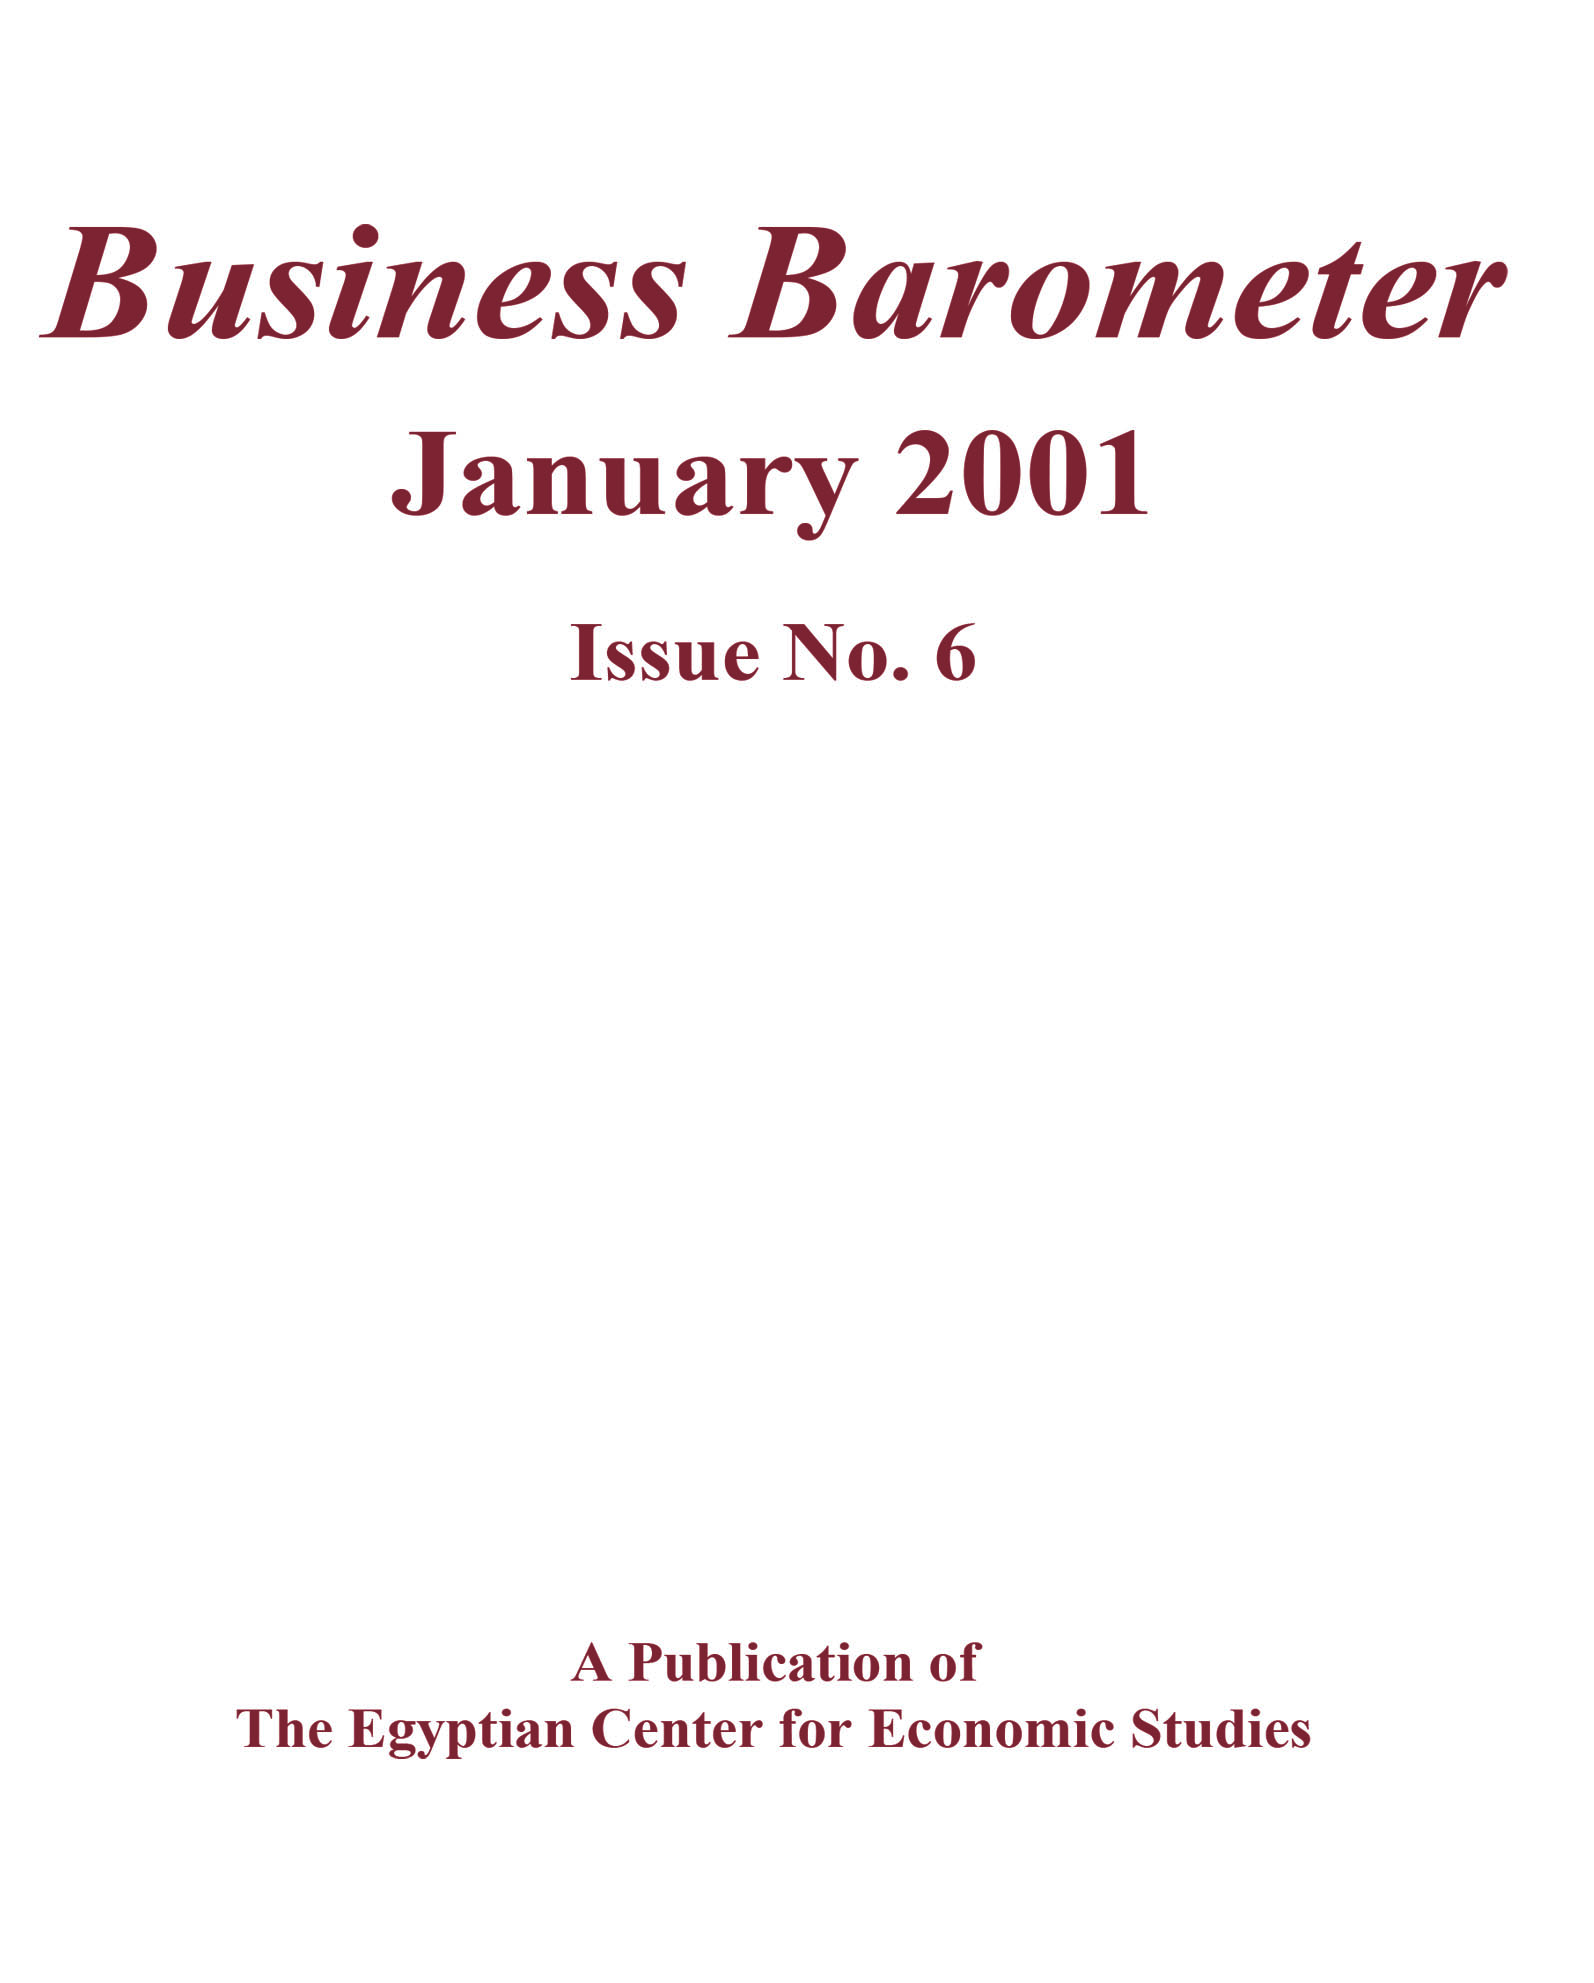 Issue 6 (July – December 2000)